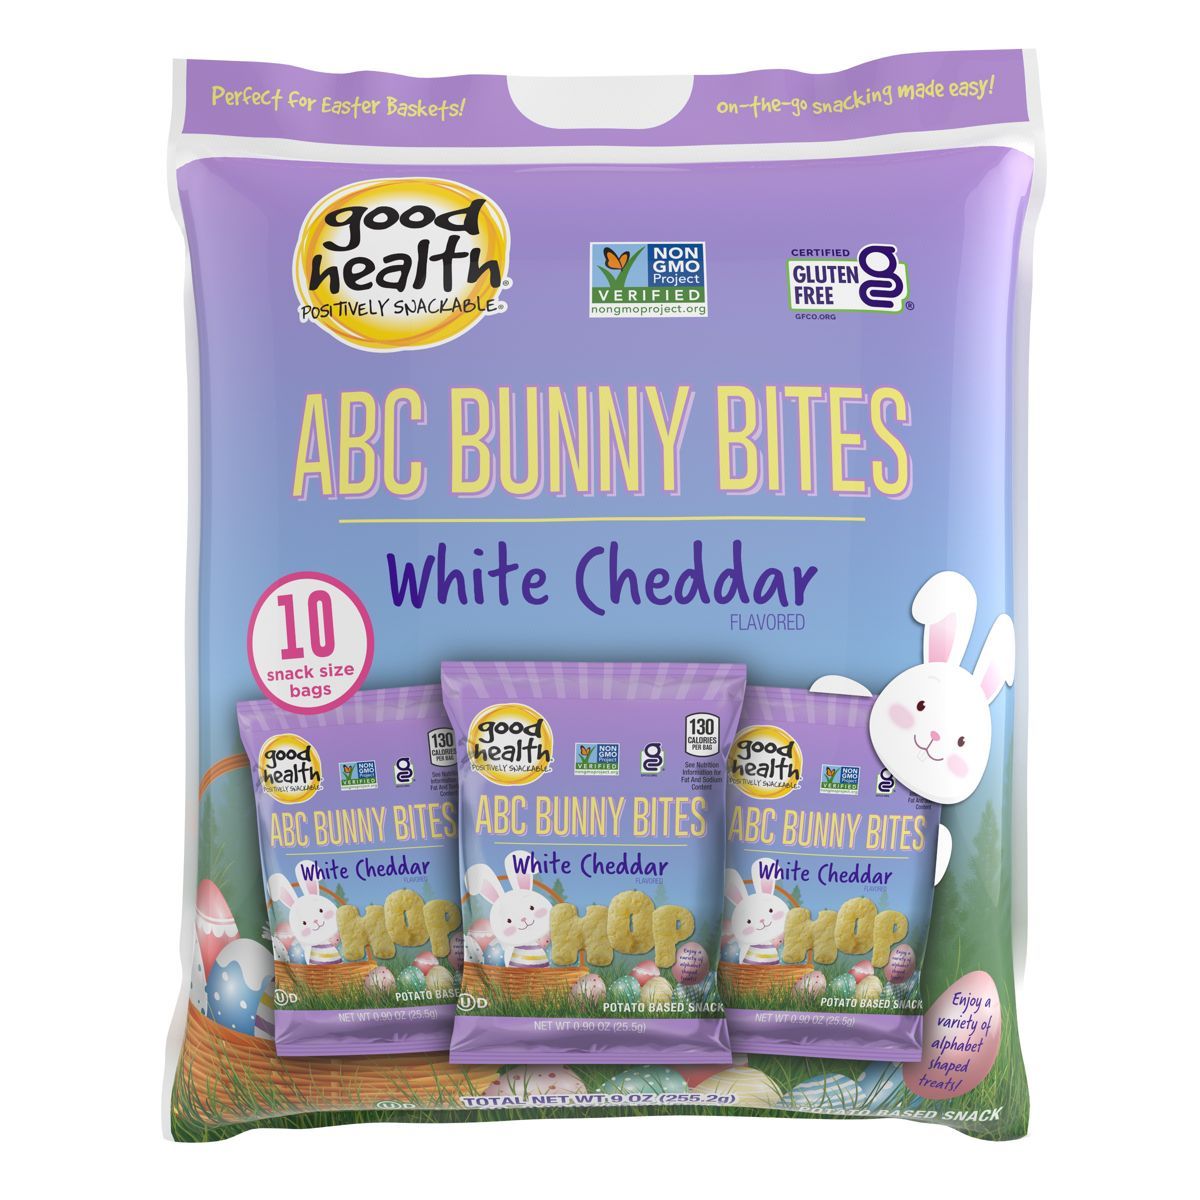 Good Health ABC Bunny Bites White Cheddar Snack Bags - 10ct | Target